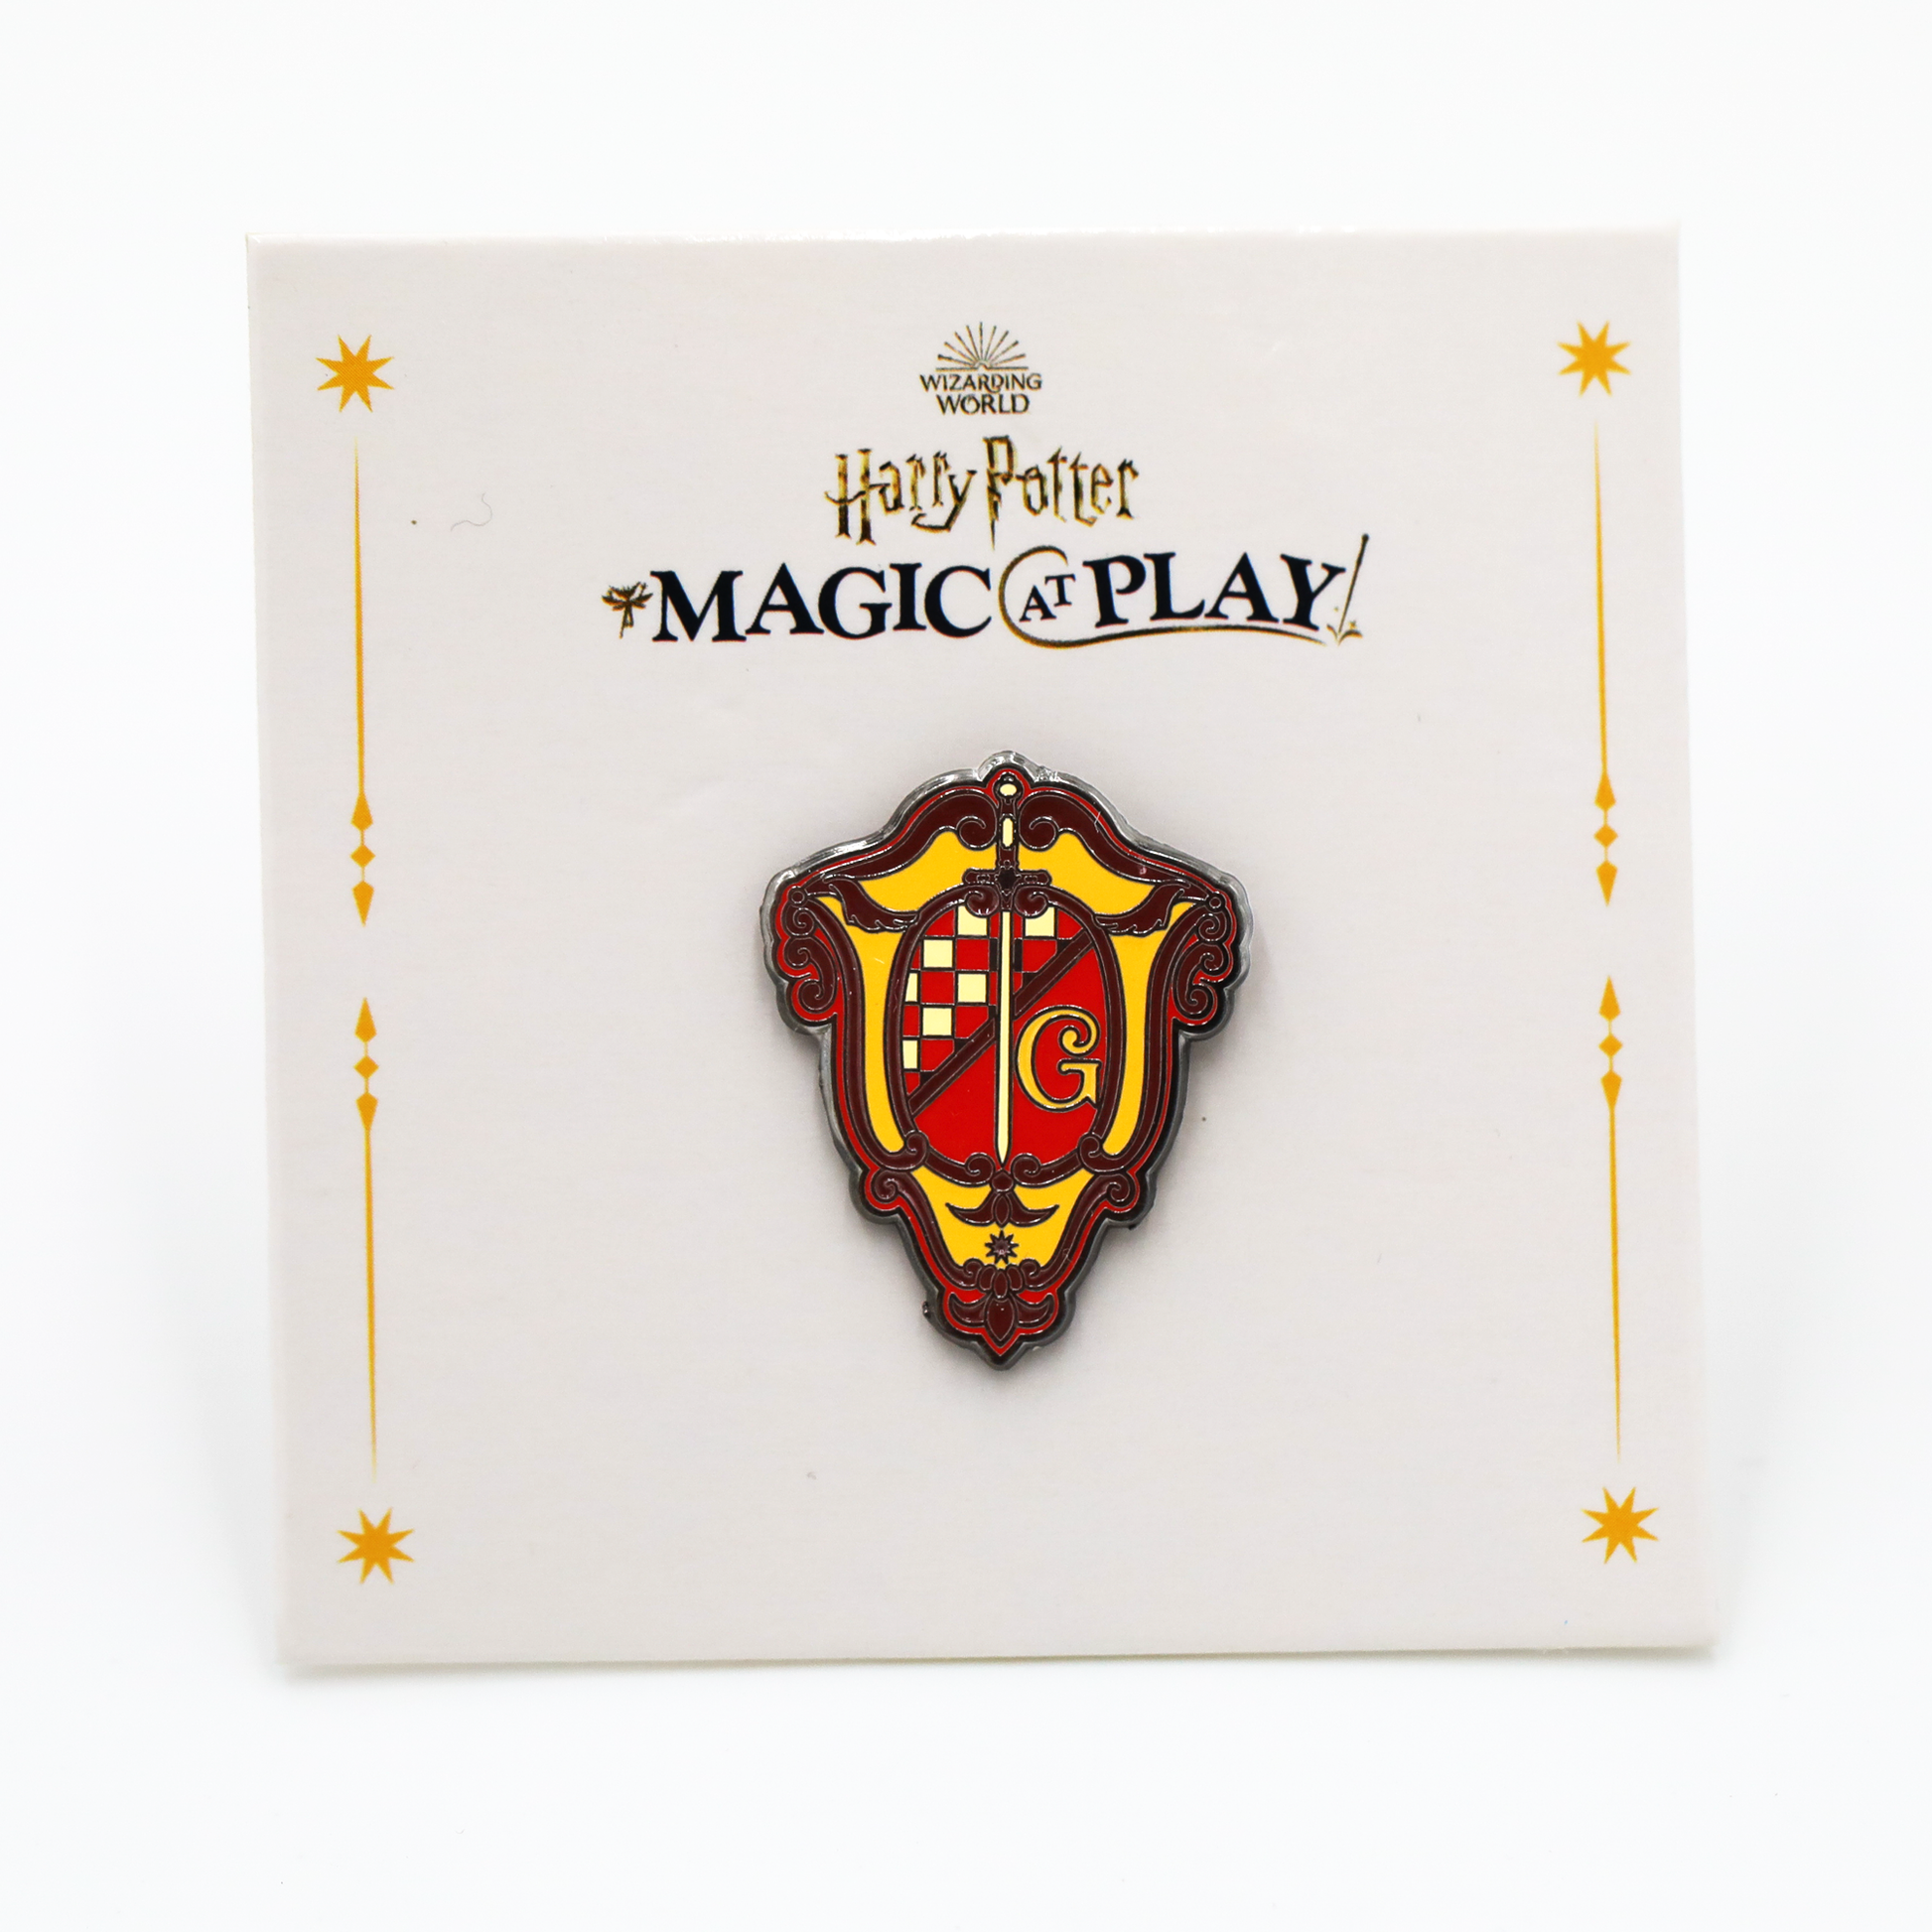 Harry potter Potions Limited Edition Pin Badges Set Multicolor